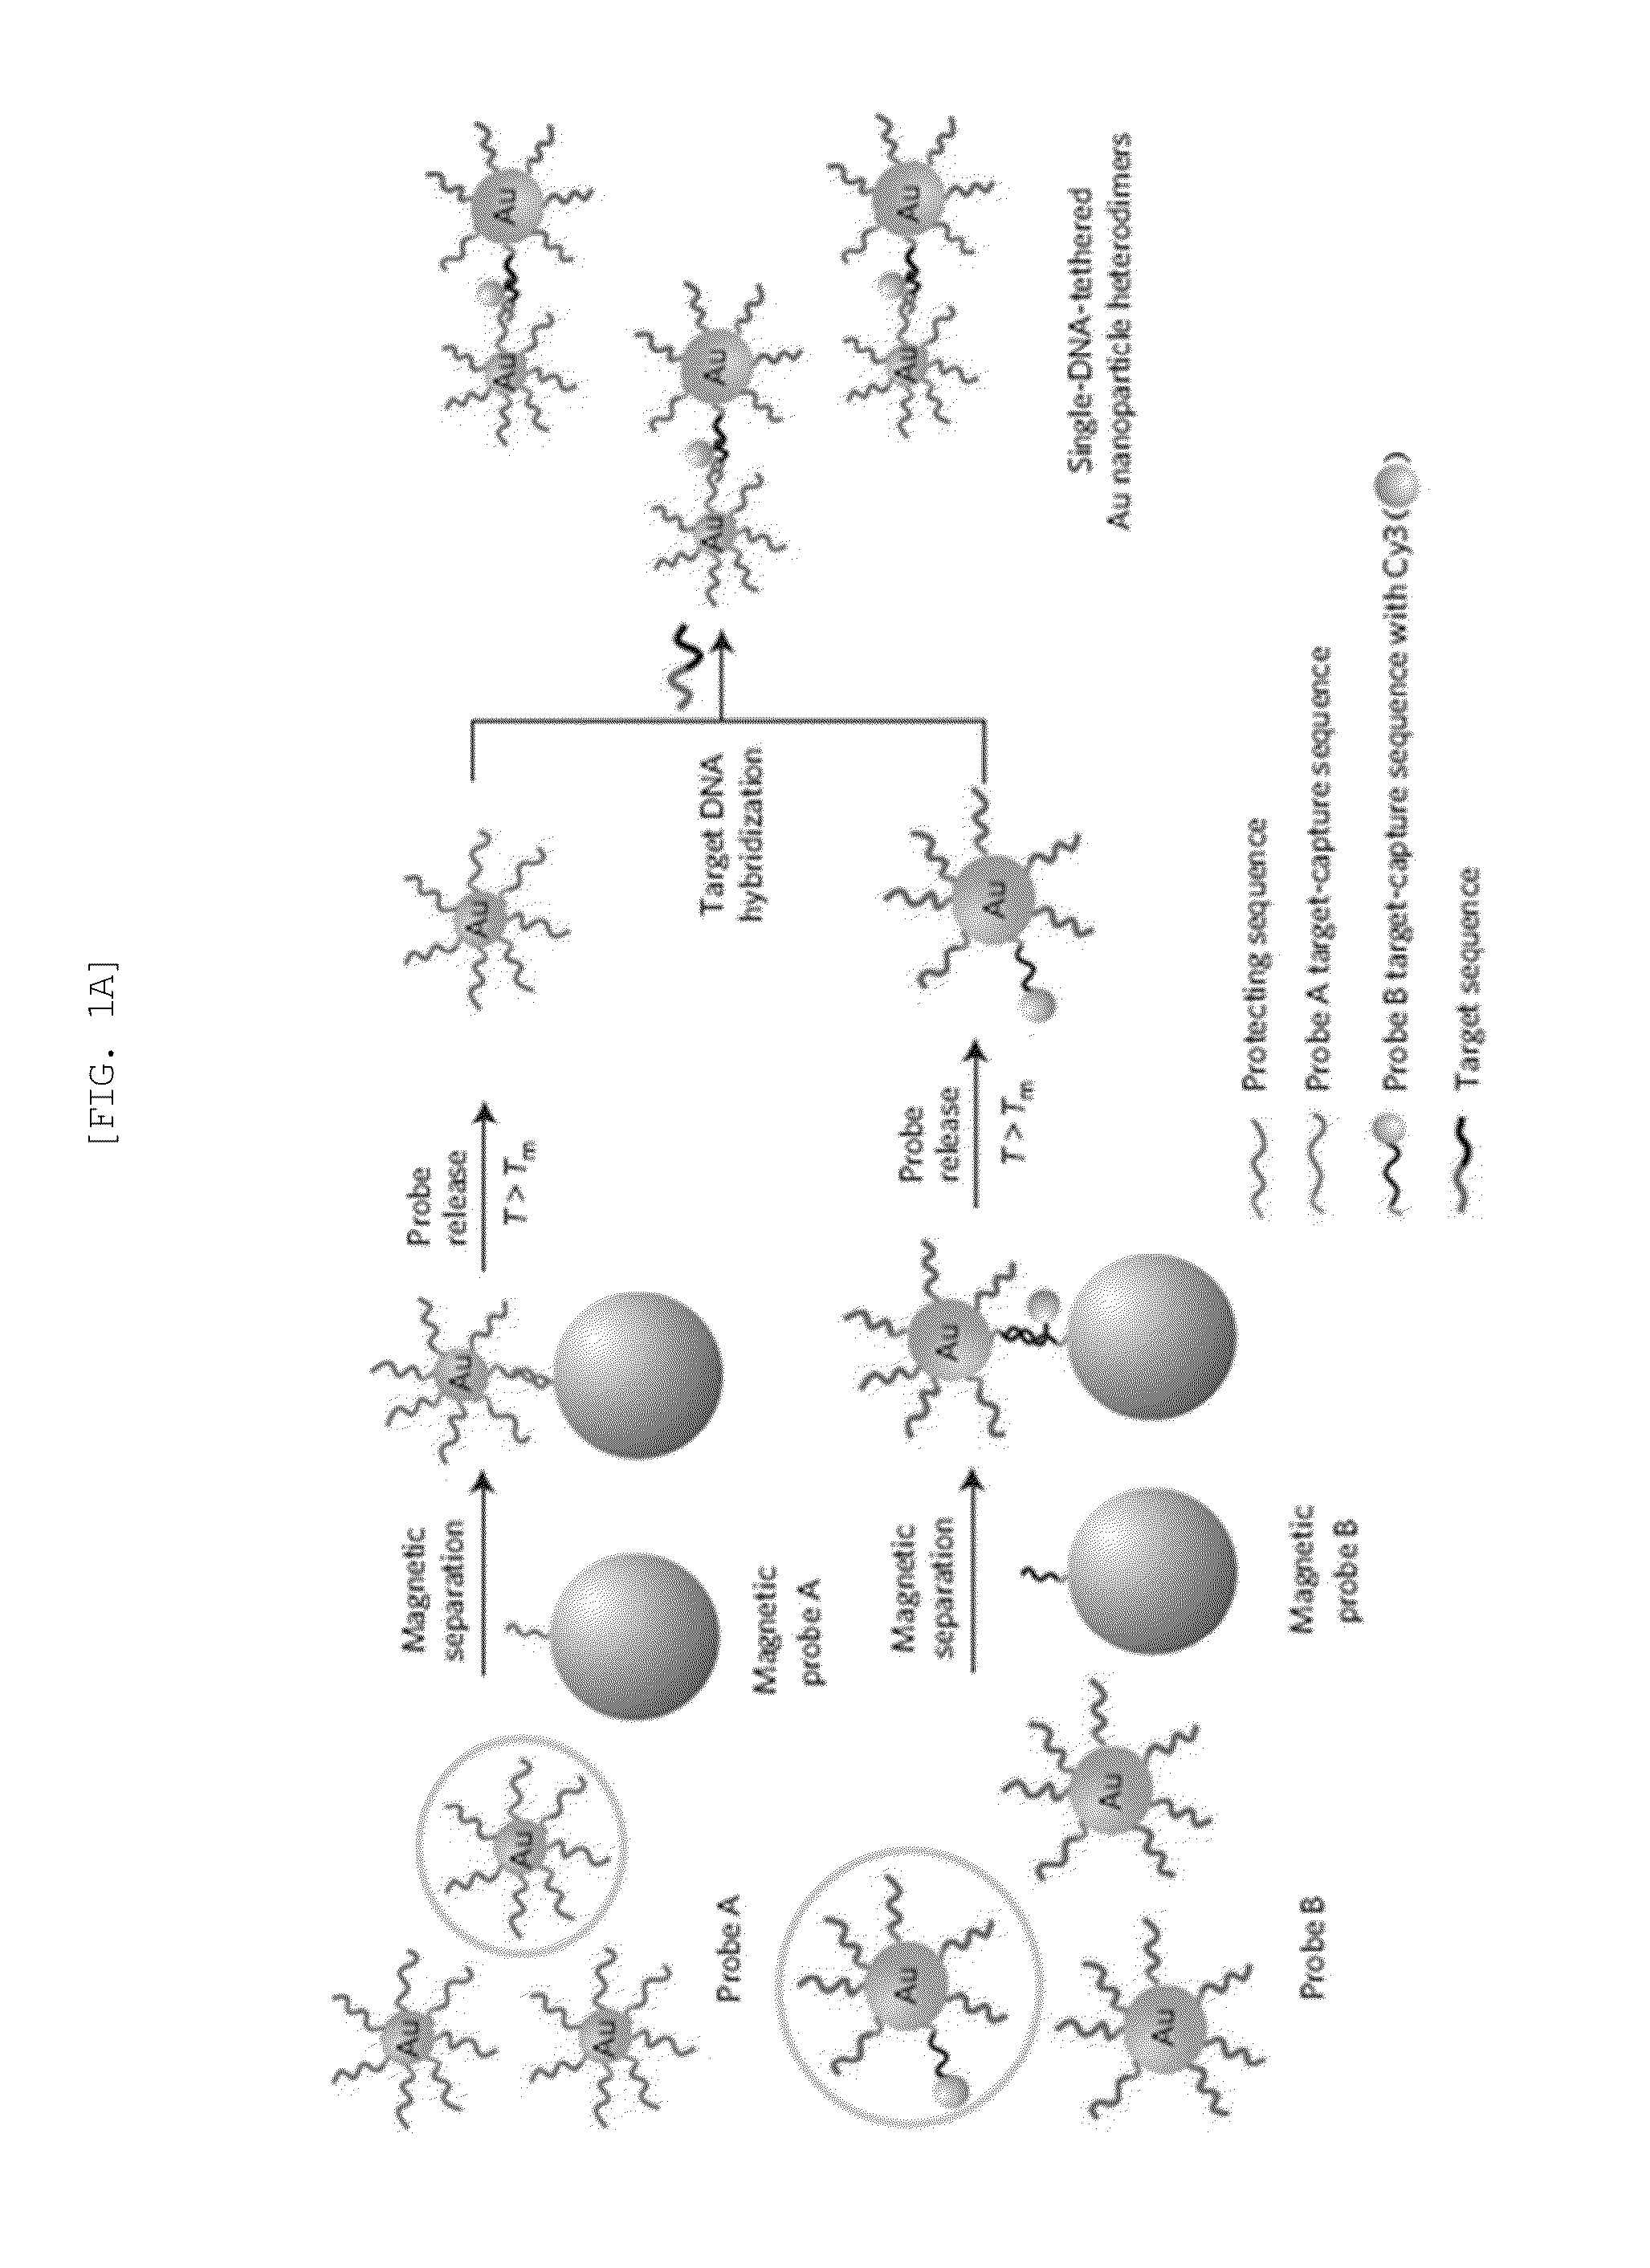 Heterodimeric core-shell nanoparticle in which raman-active molecules are located at a binding portion of a nanoparticle heterodimer, use thereof, and method for preparing same